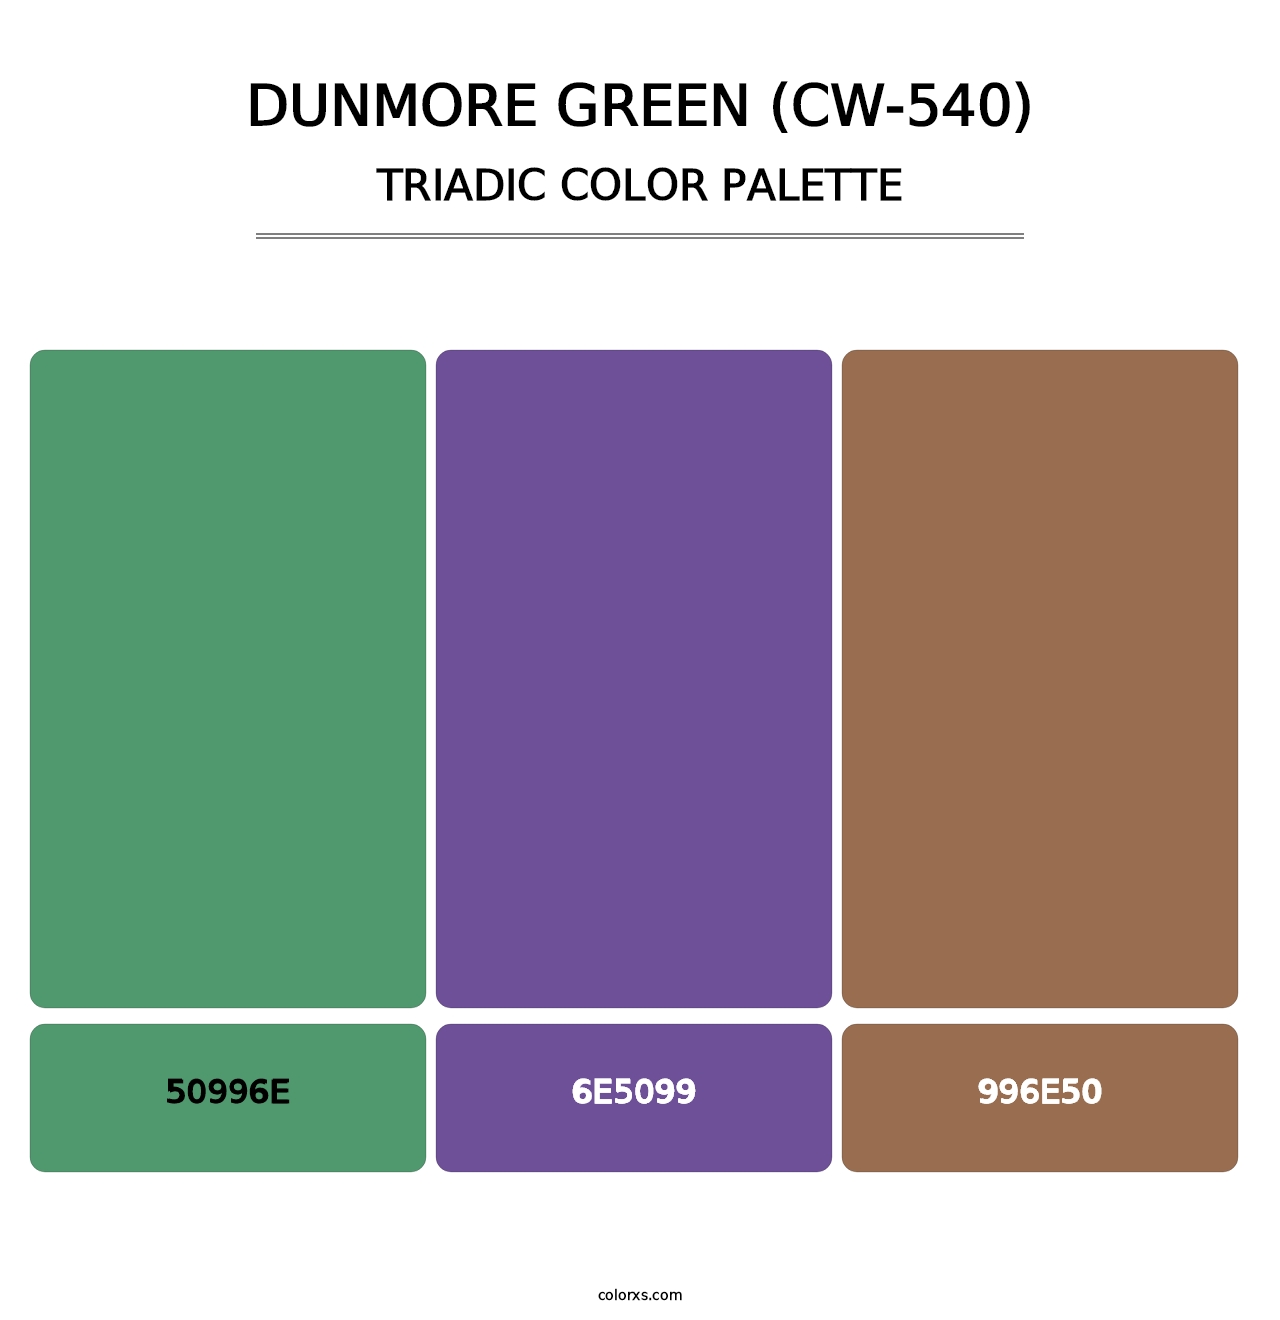 Dunmore Green (CW-540) - Triadic Color Palette